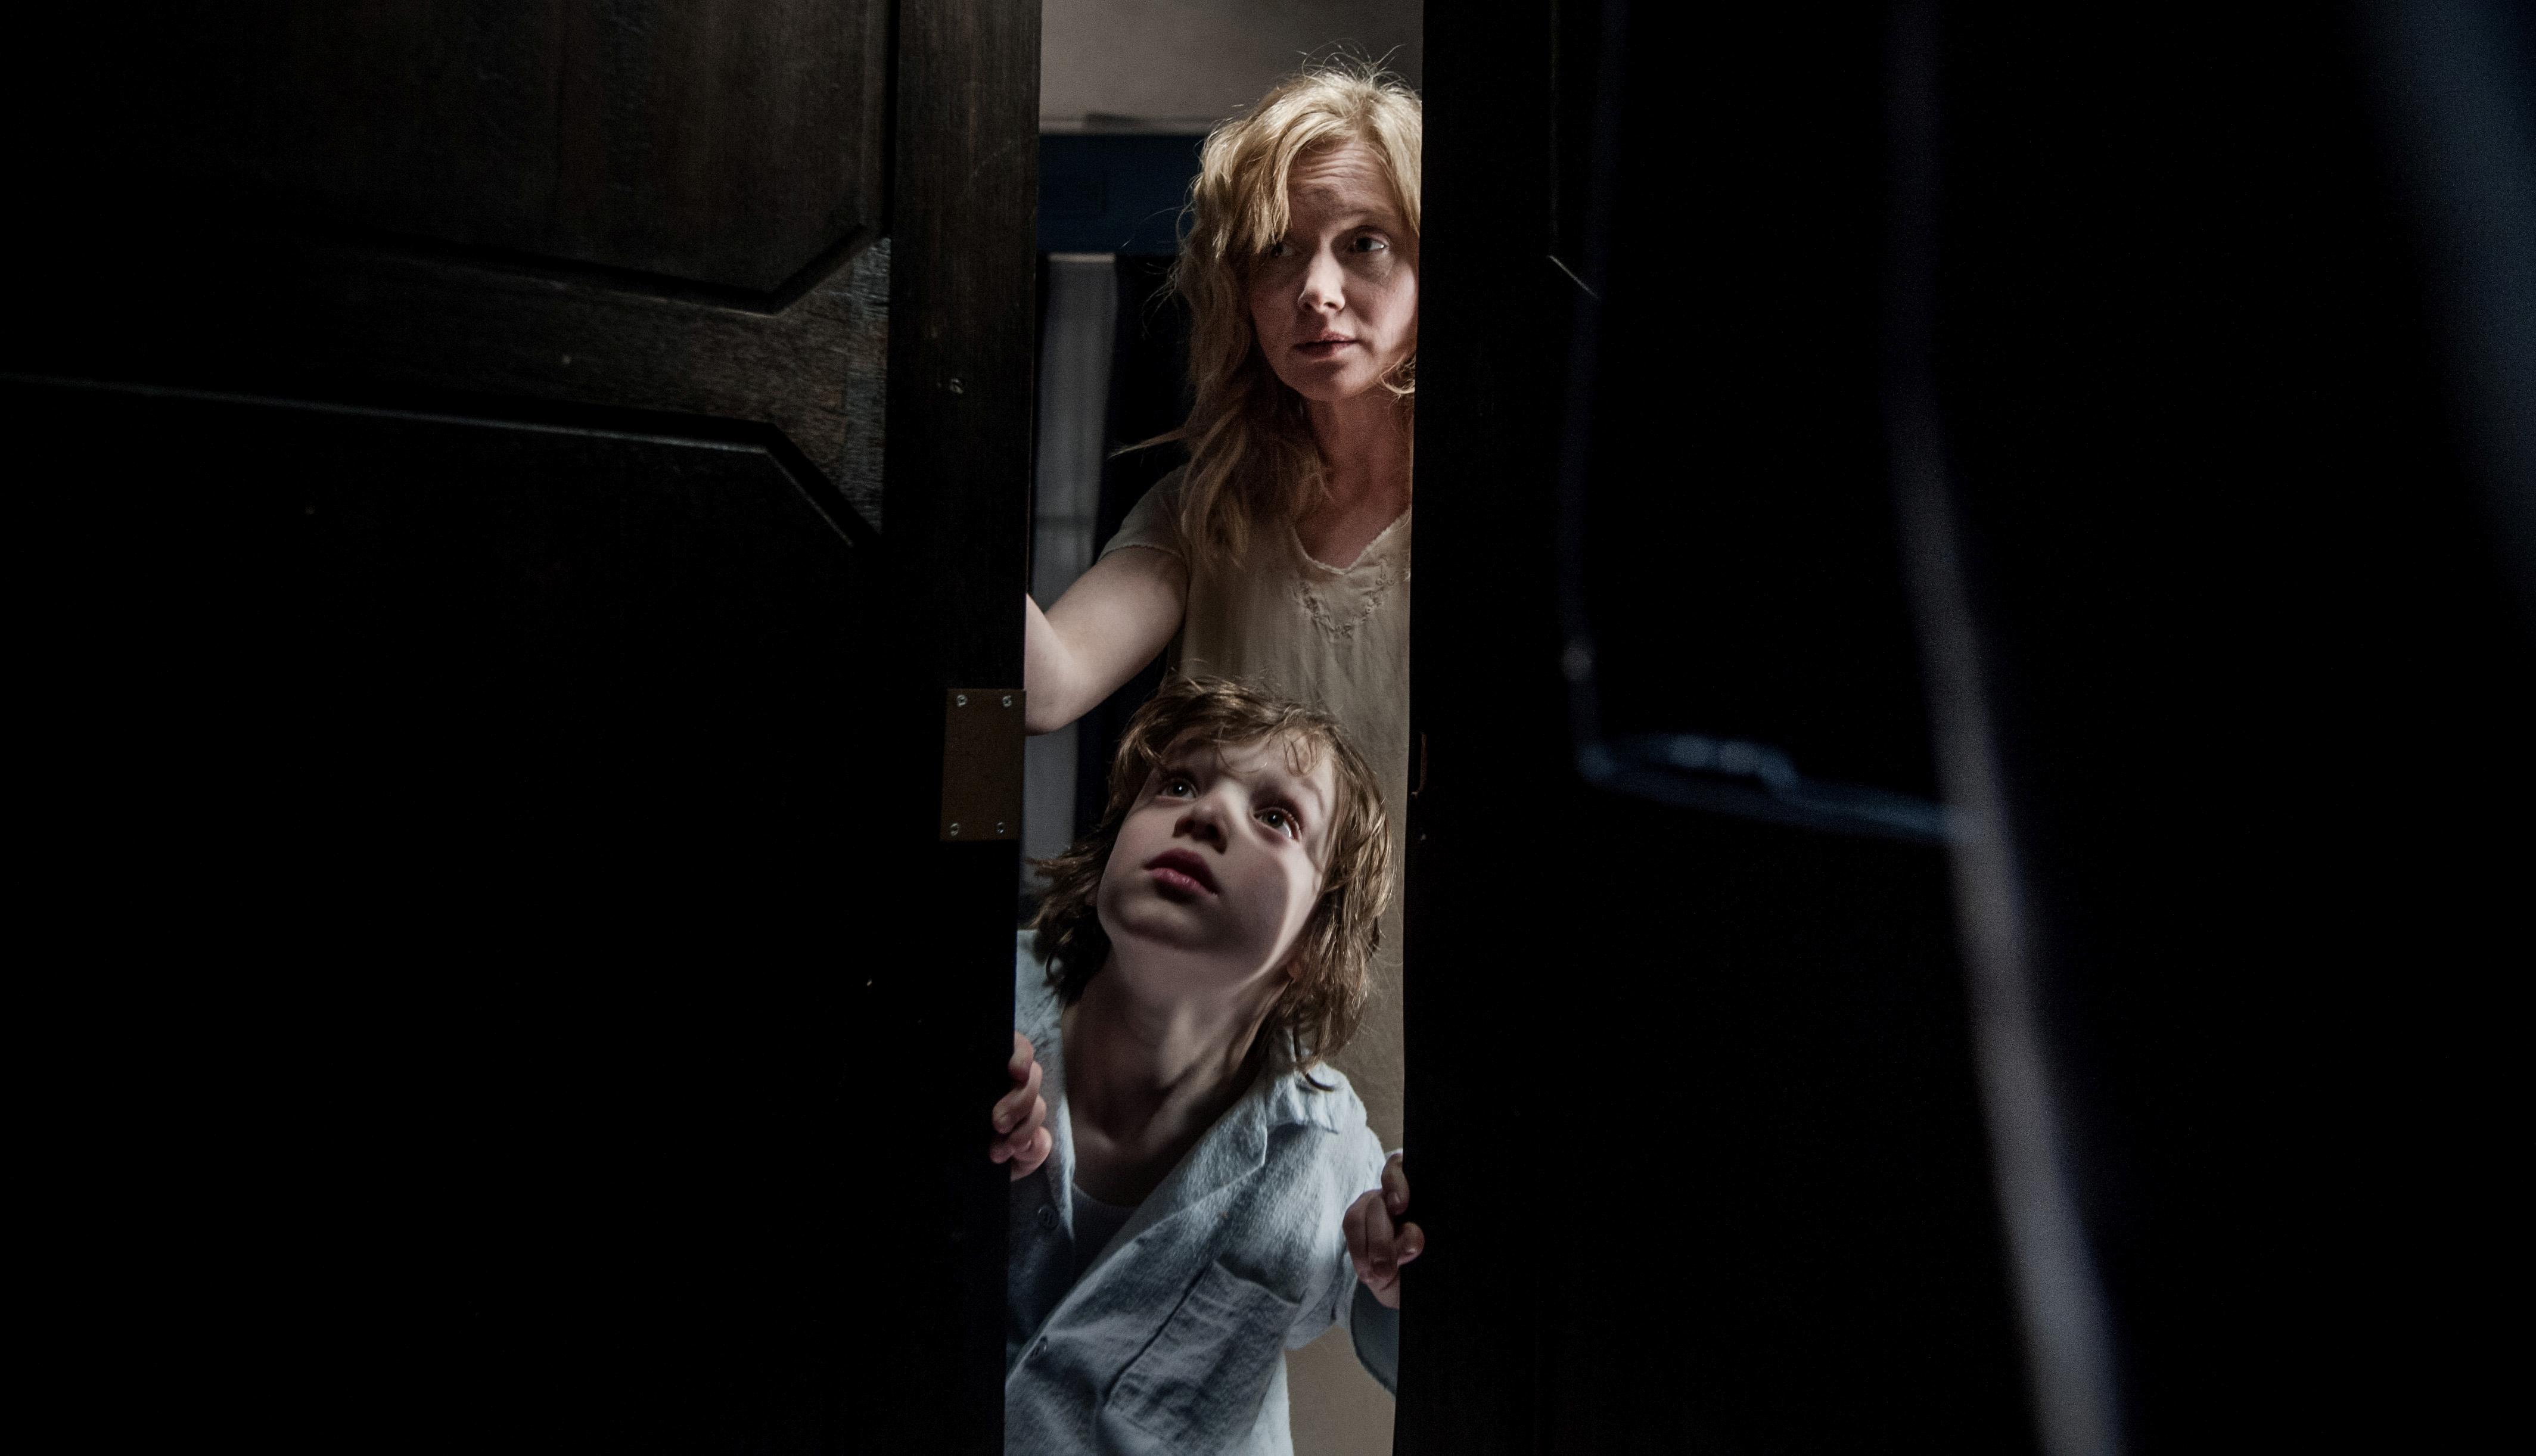 Movie The Babadook 4k Ultra HD Wallpaper